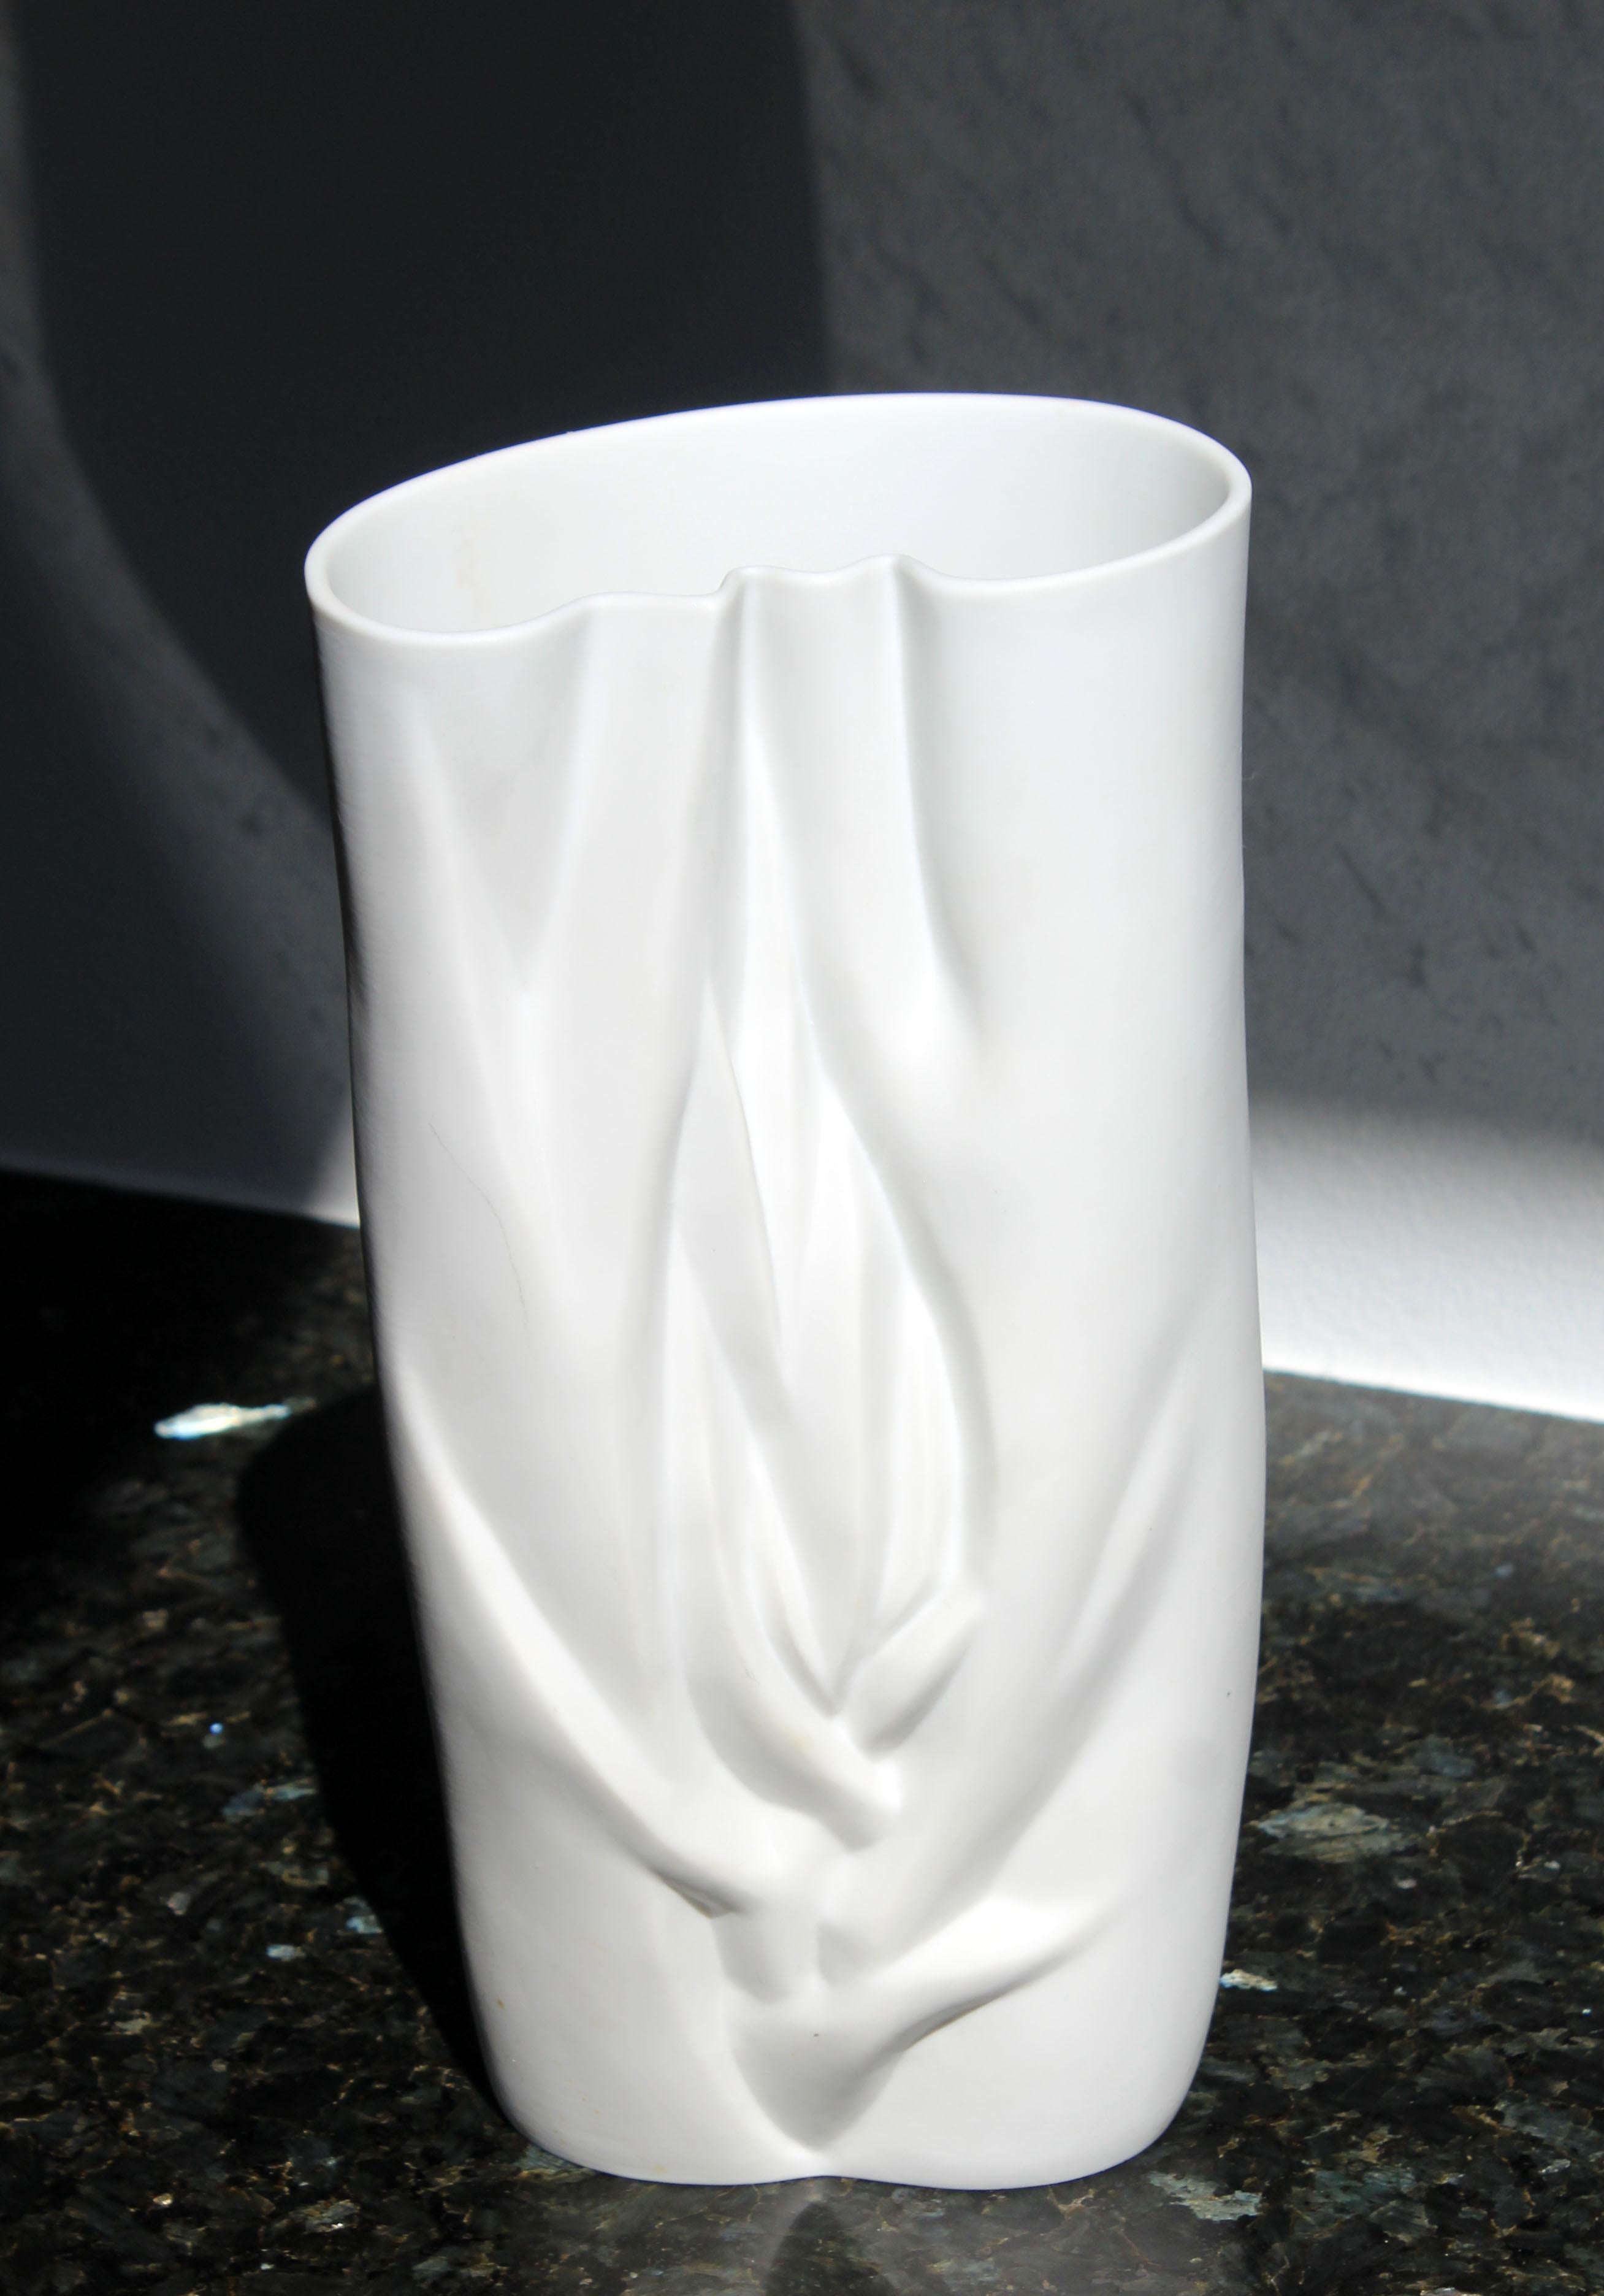 For your consideration is a phenomenal, white ceramic porcelain vase, with a beautiful design, stamped by Meissen. In excellent condition. The dimensions are 5